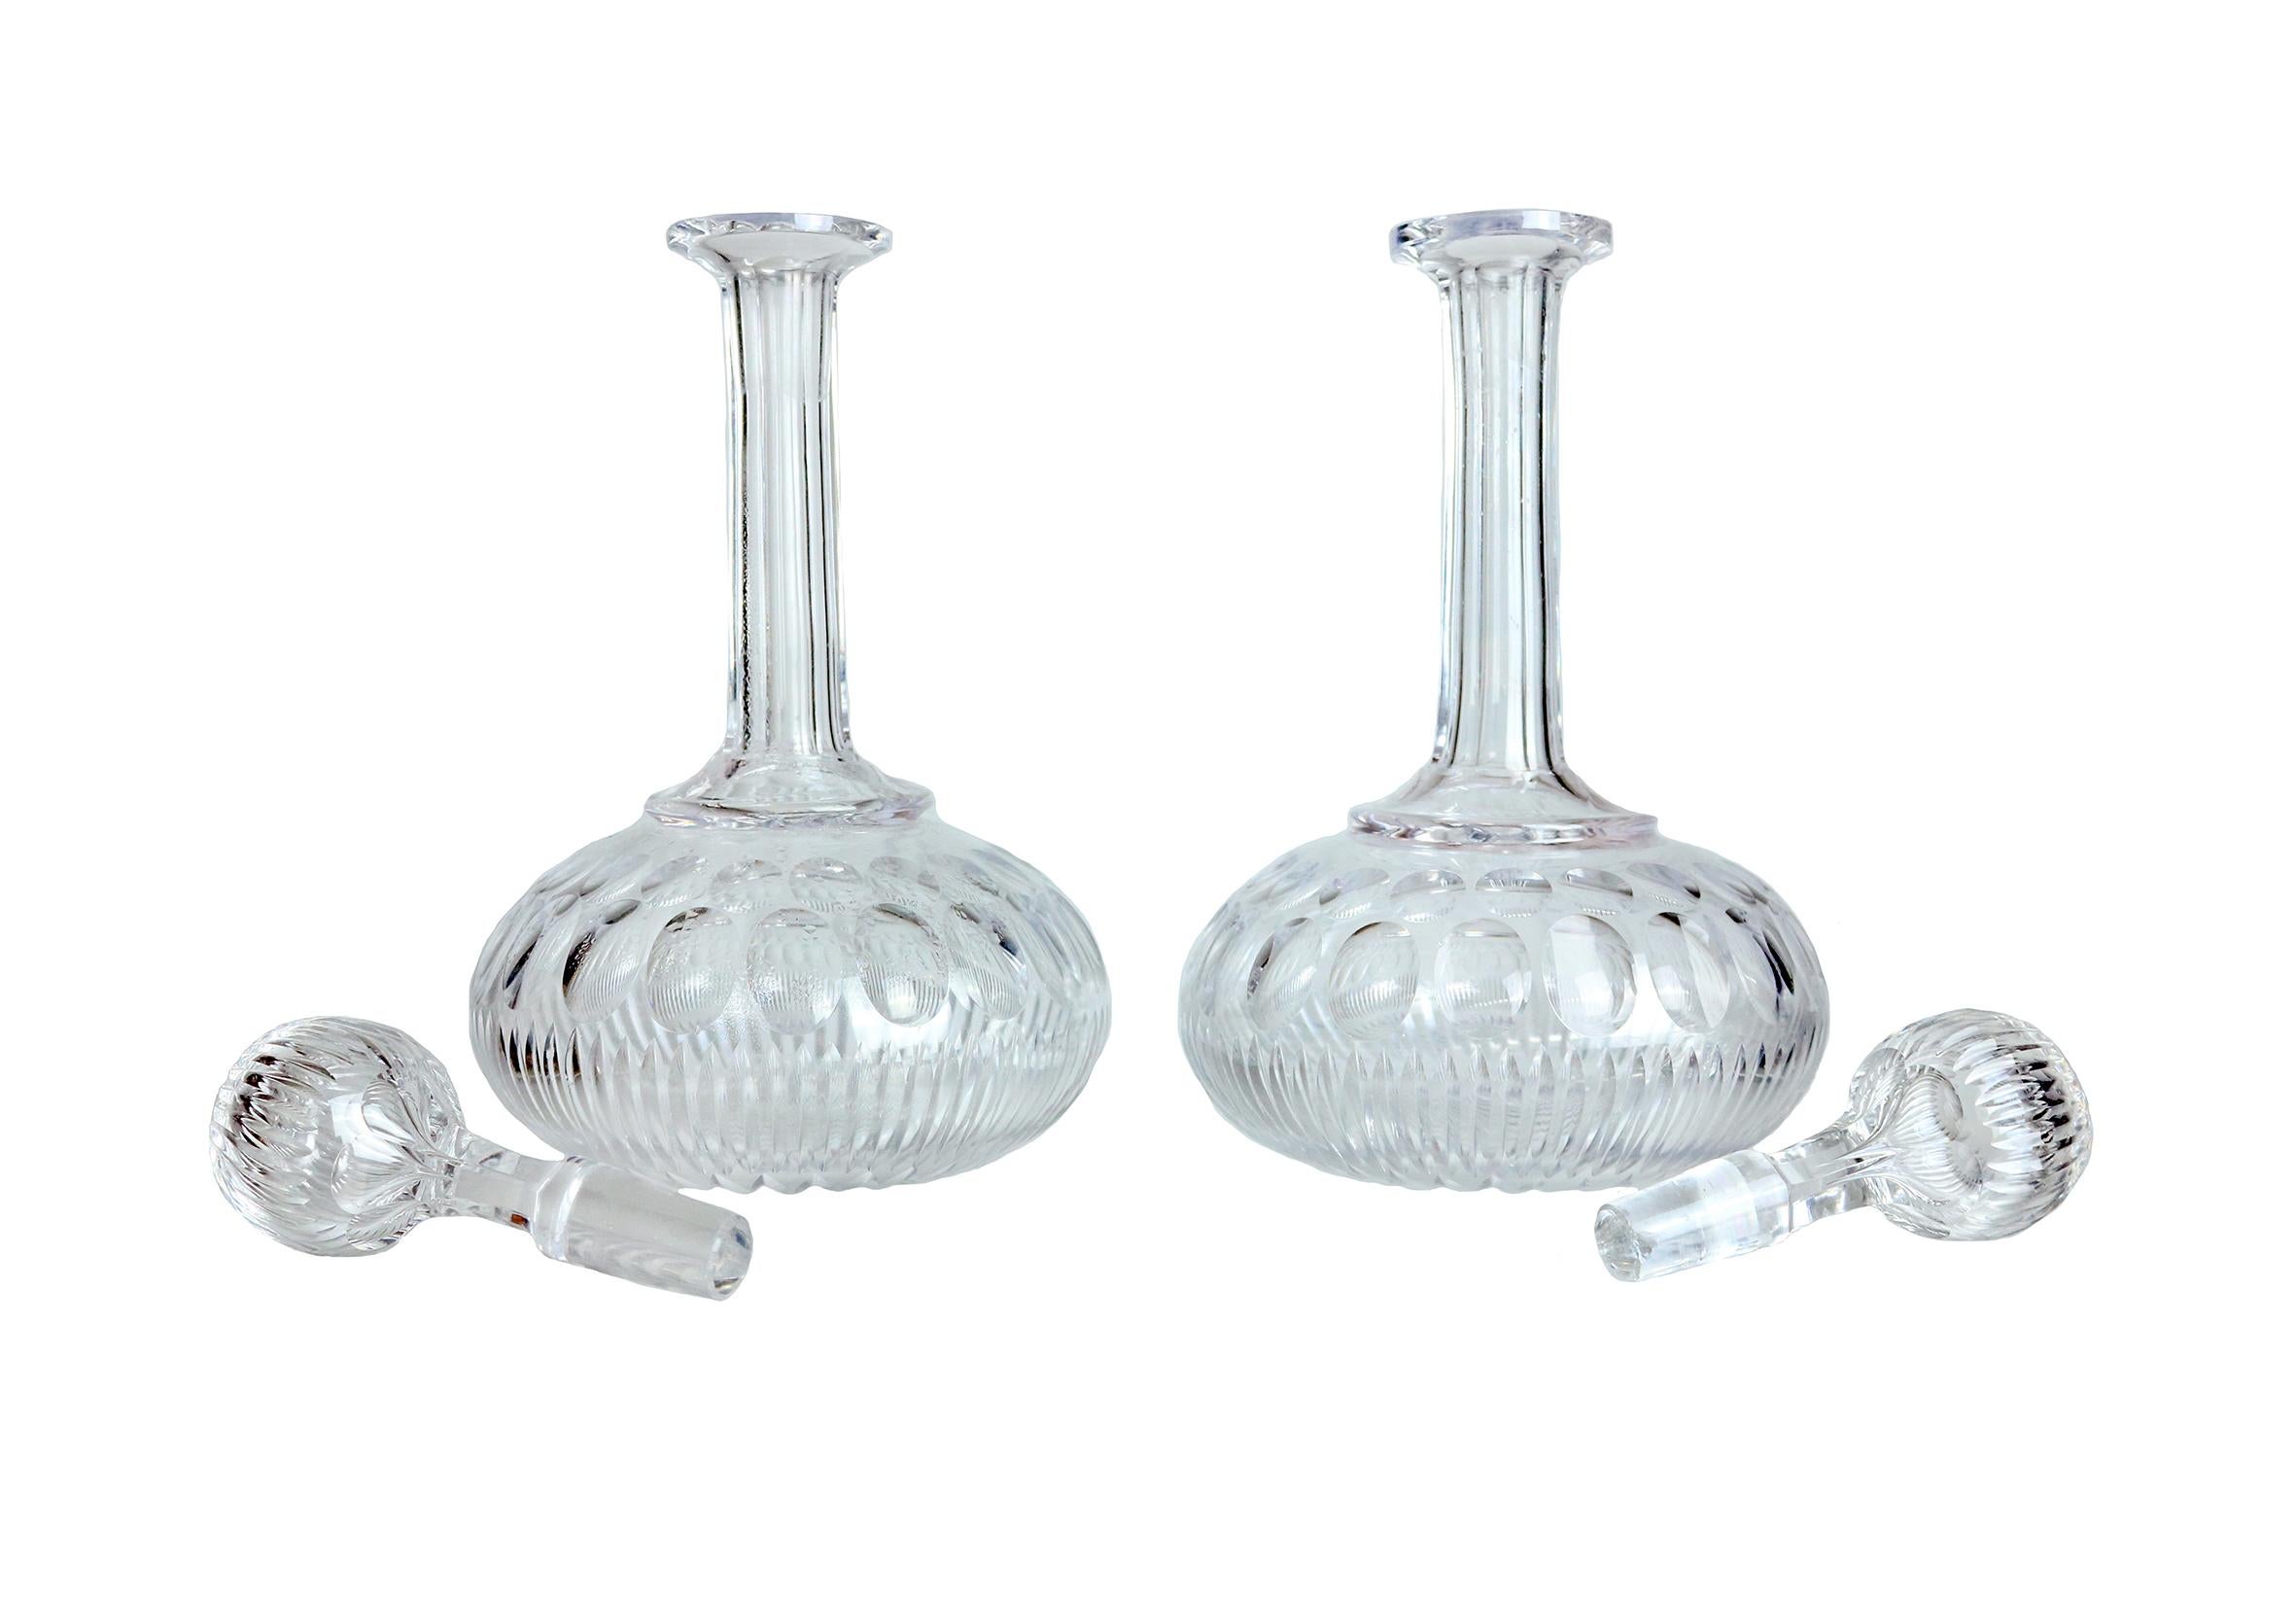 A stunning pair of 19th century glass decanters with original stoppers. Fantastic globe shape and intricate pattern.